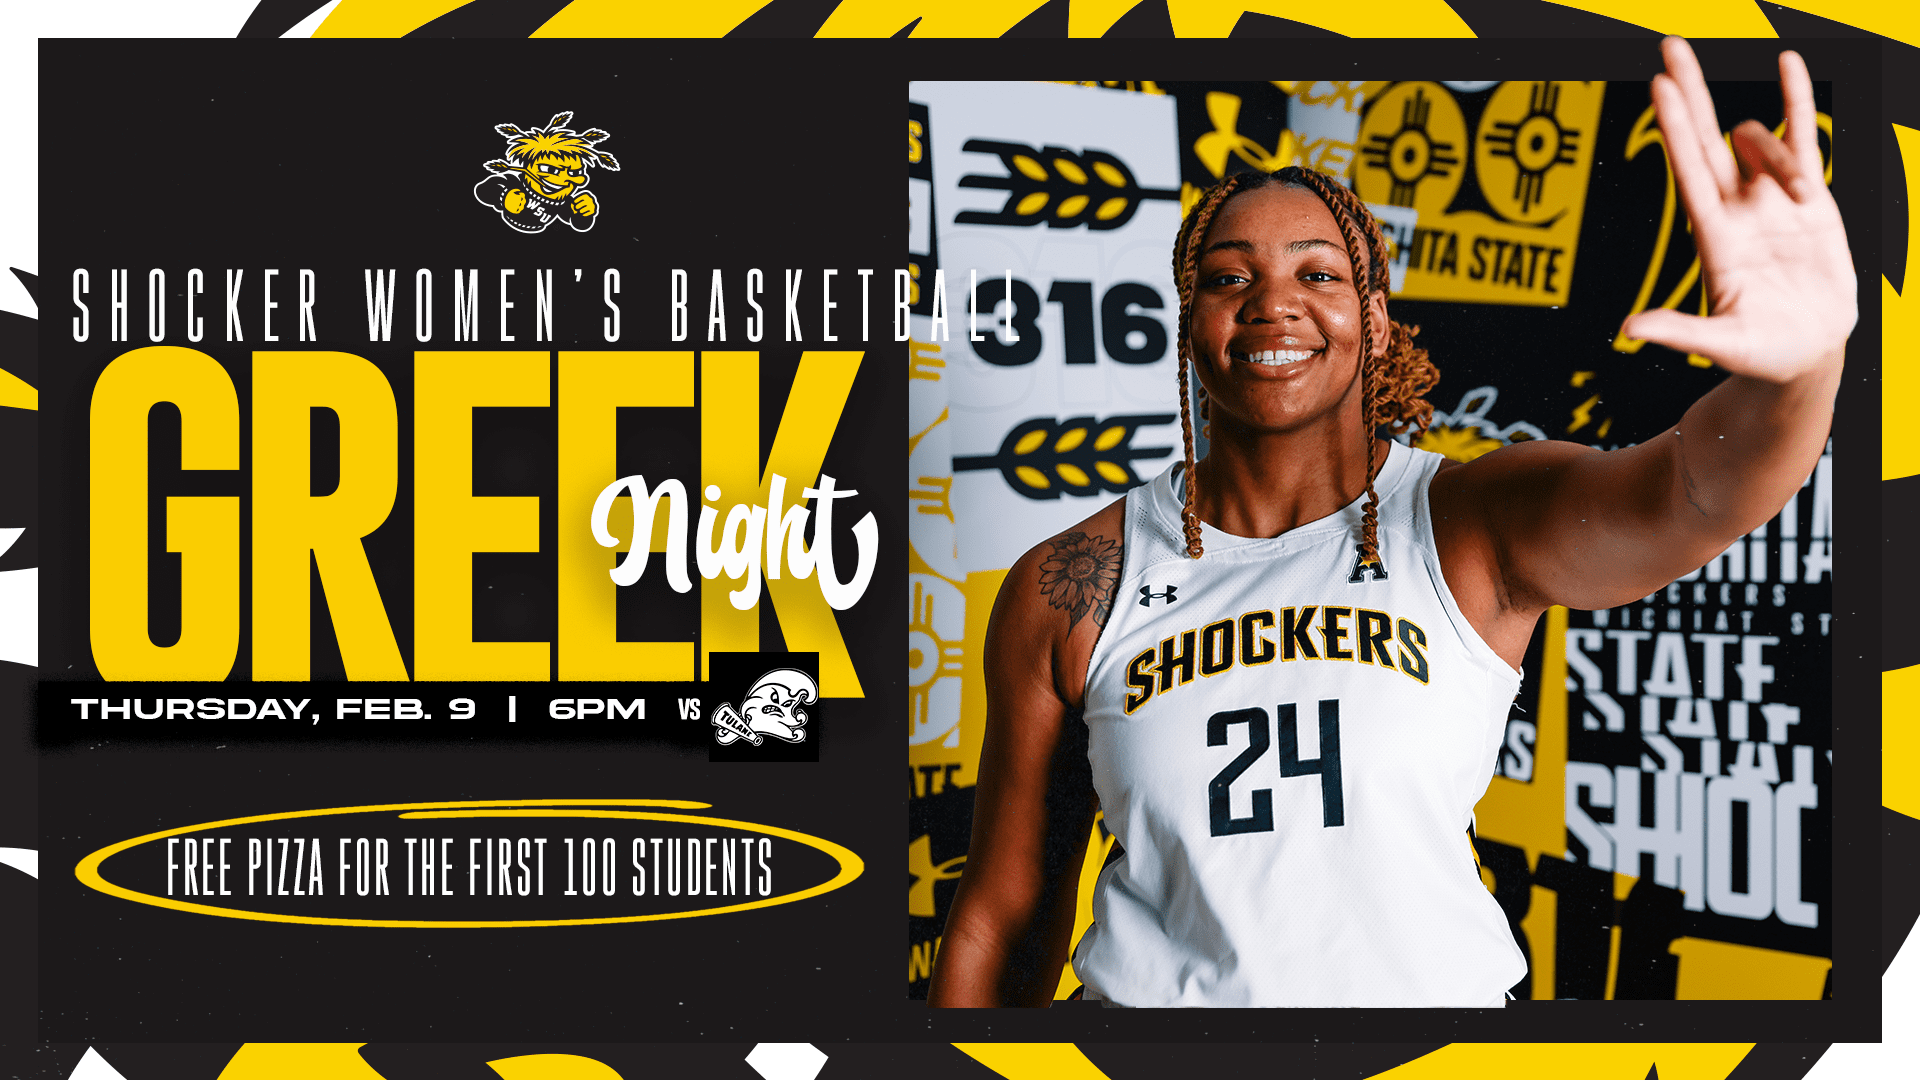 Photo of Trajata Colbert of women's basketball with the text, "Shocker women's basketball Greek night at 6 p.m. Thursday, Feb. 9 versus Tulane. Free pizza for the first 100 students."